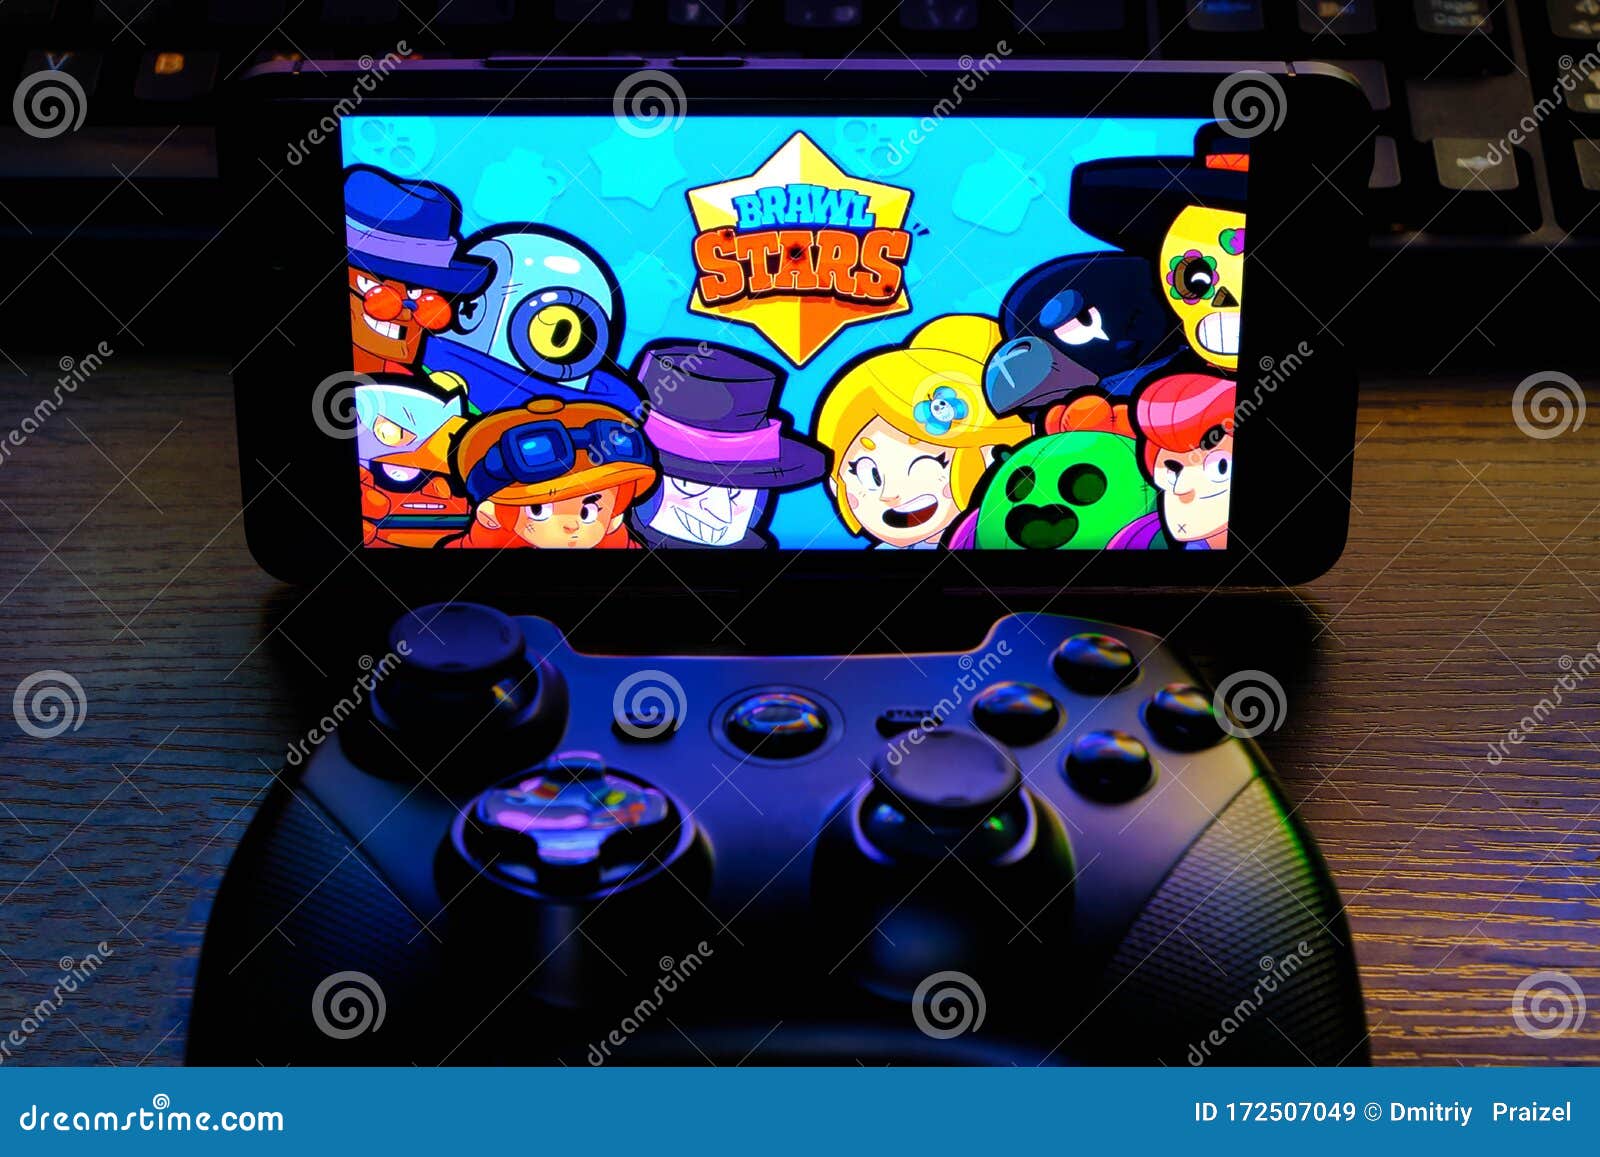 Brawl Stars Photos Free Royalty Free Stock Photos From Dreamstime - use controller on brawl stars